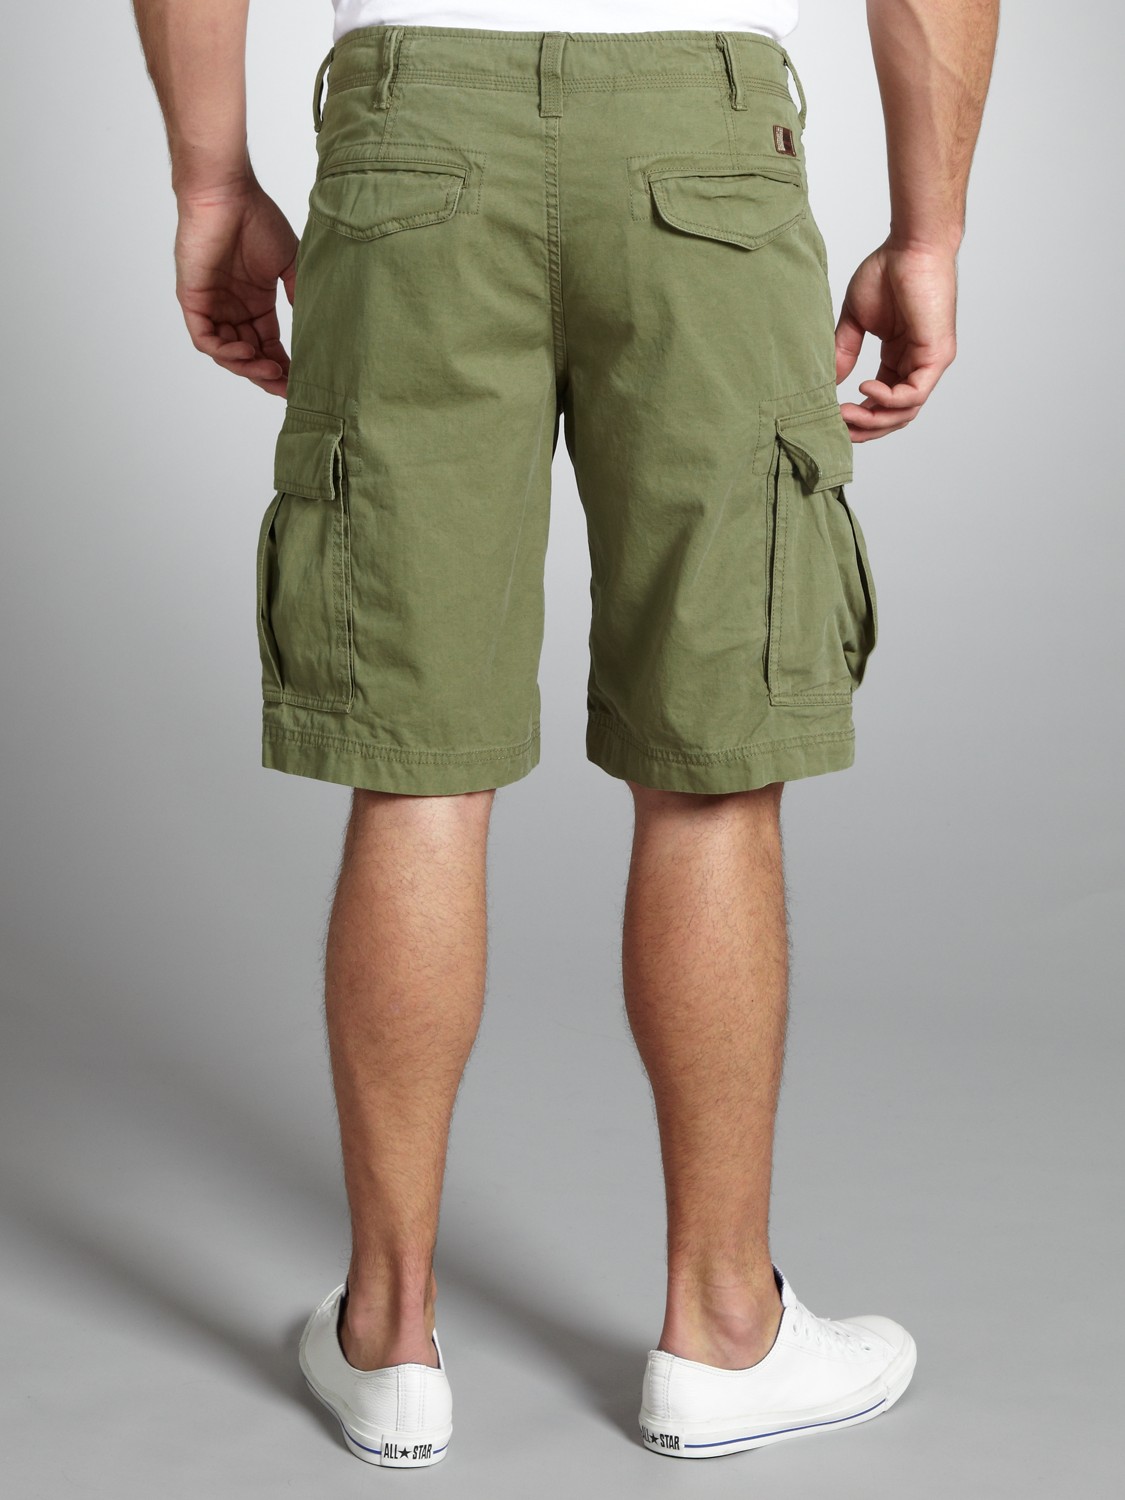 timberland and shorts - 59% OFF 